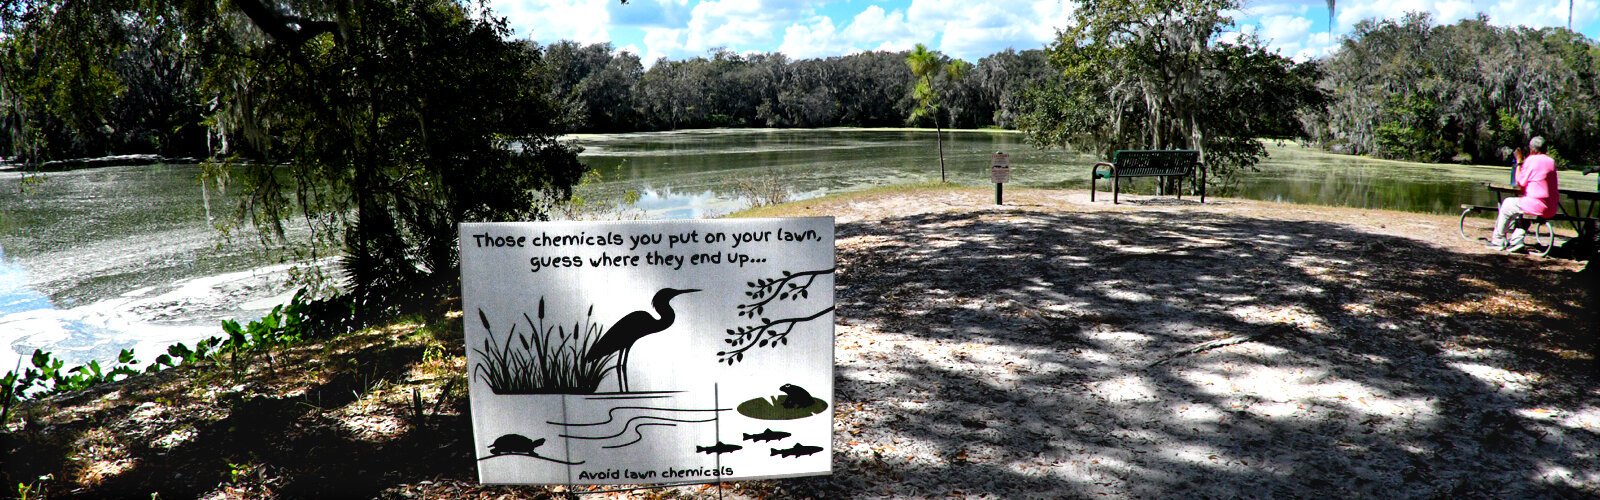 The Edward Medard Conservation Park complements the Wonders of Wildlife Festival with its beautiful nature setting, all the more reason to heed the posted ecological warning.